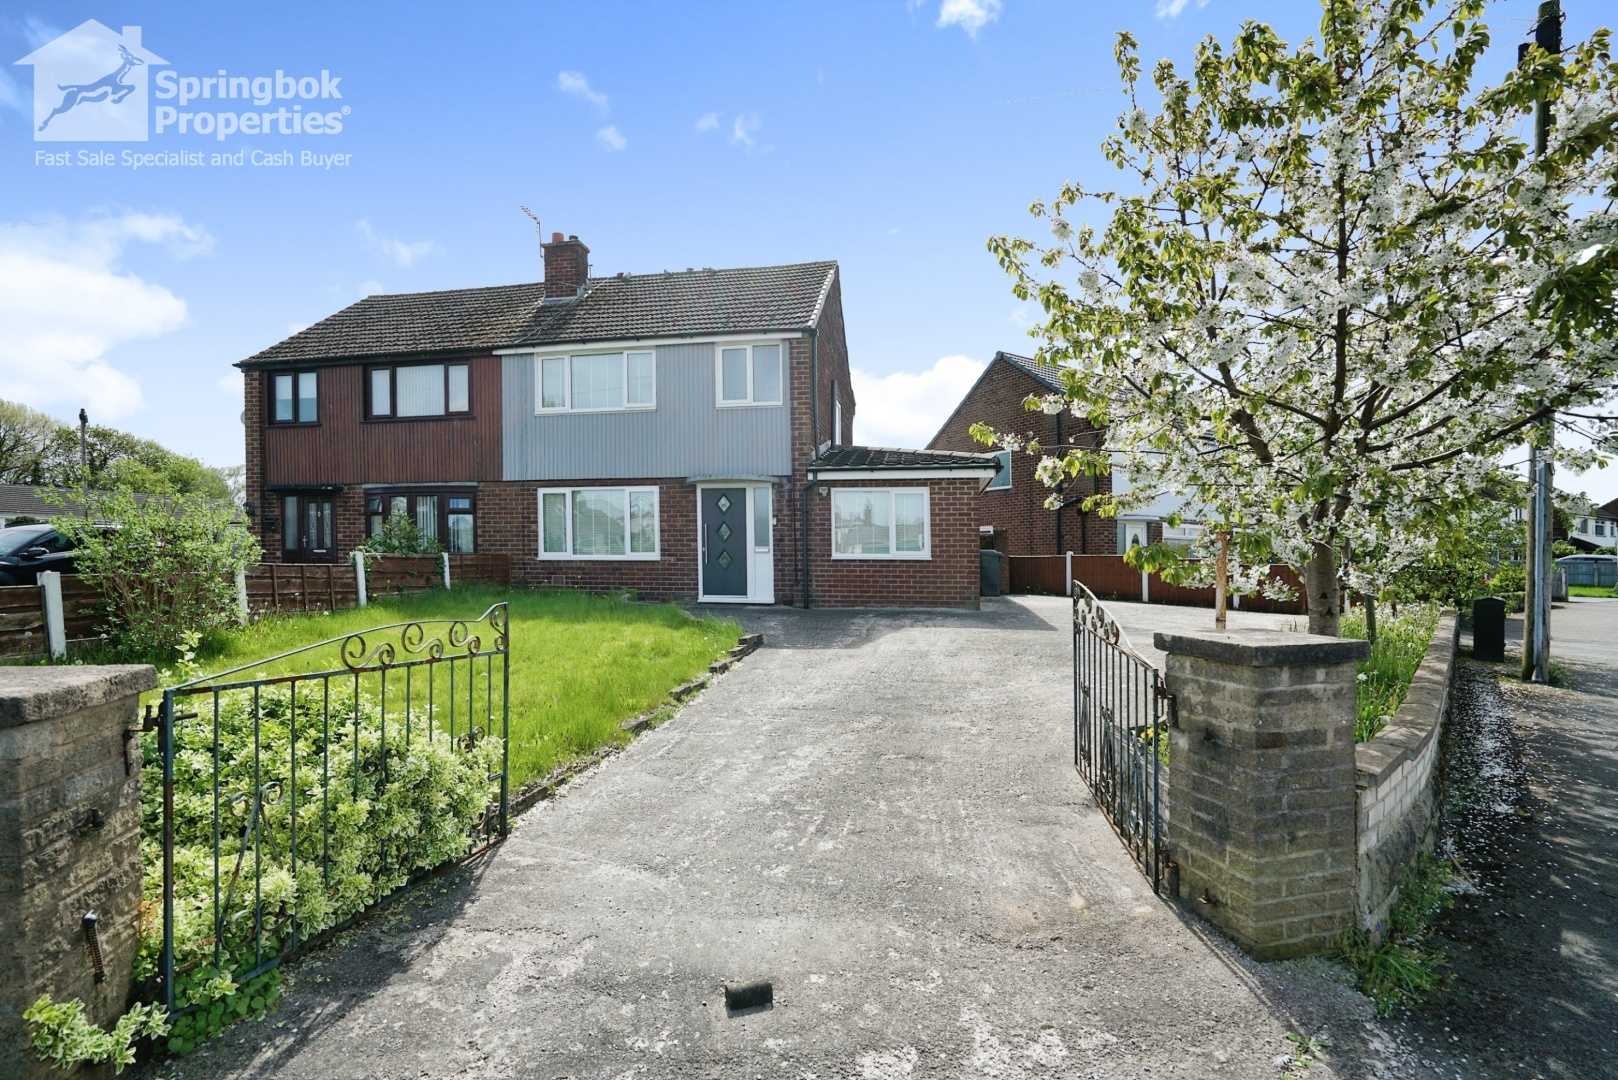 House in Irlam, Salford 11721451